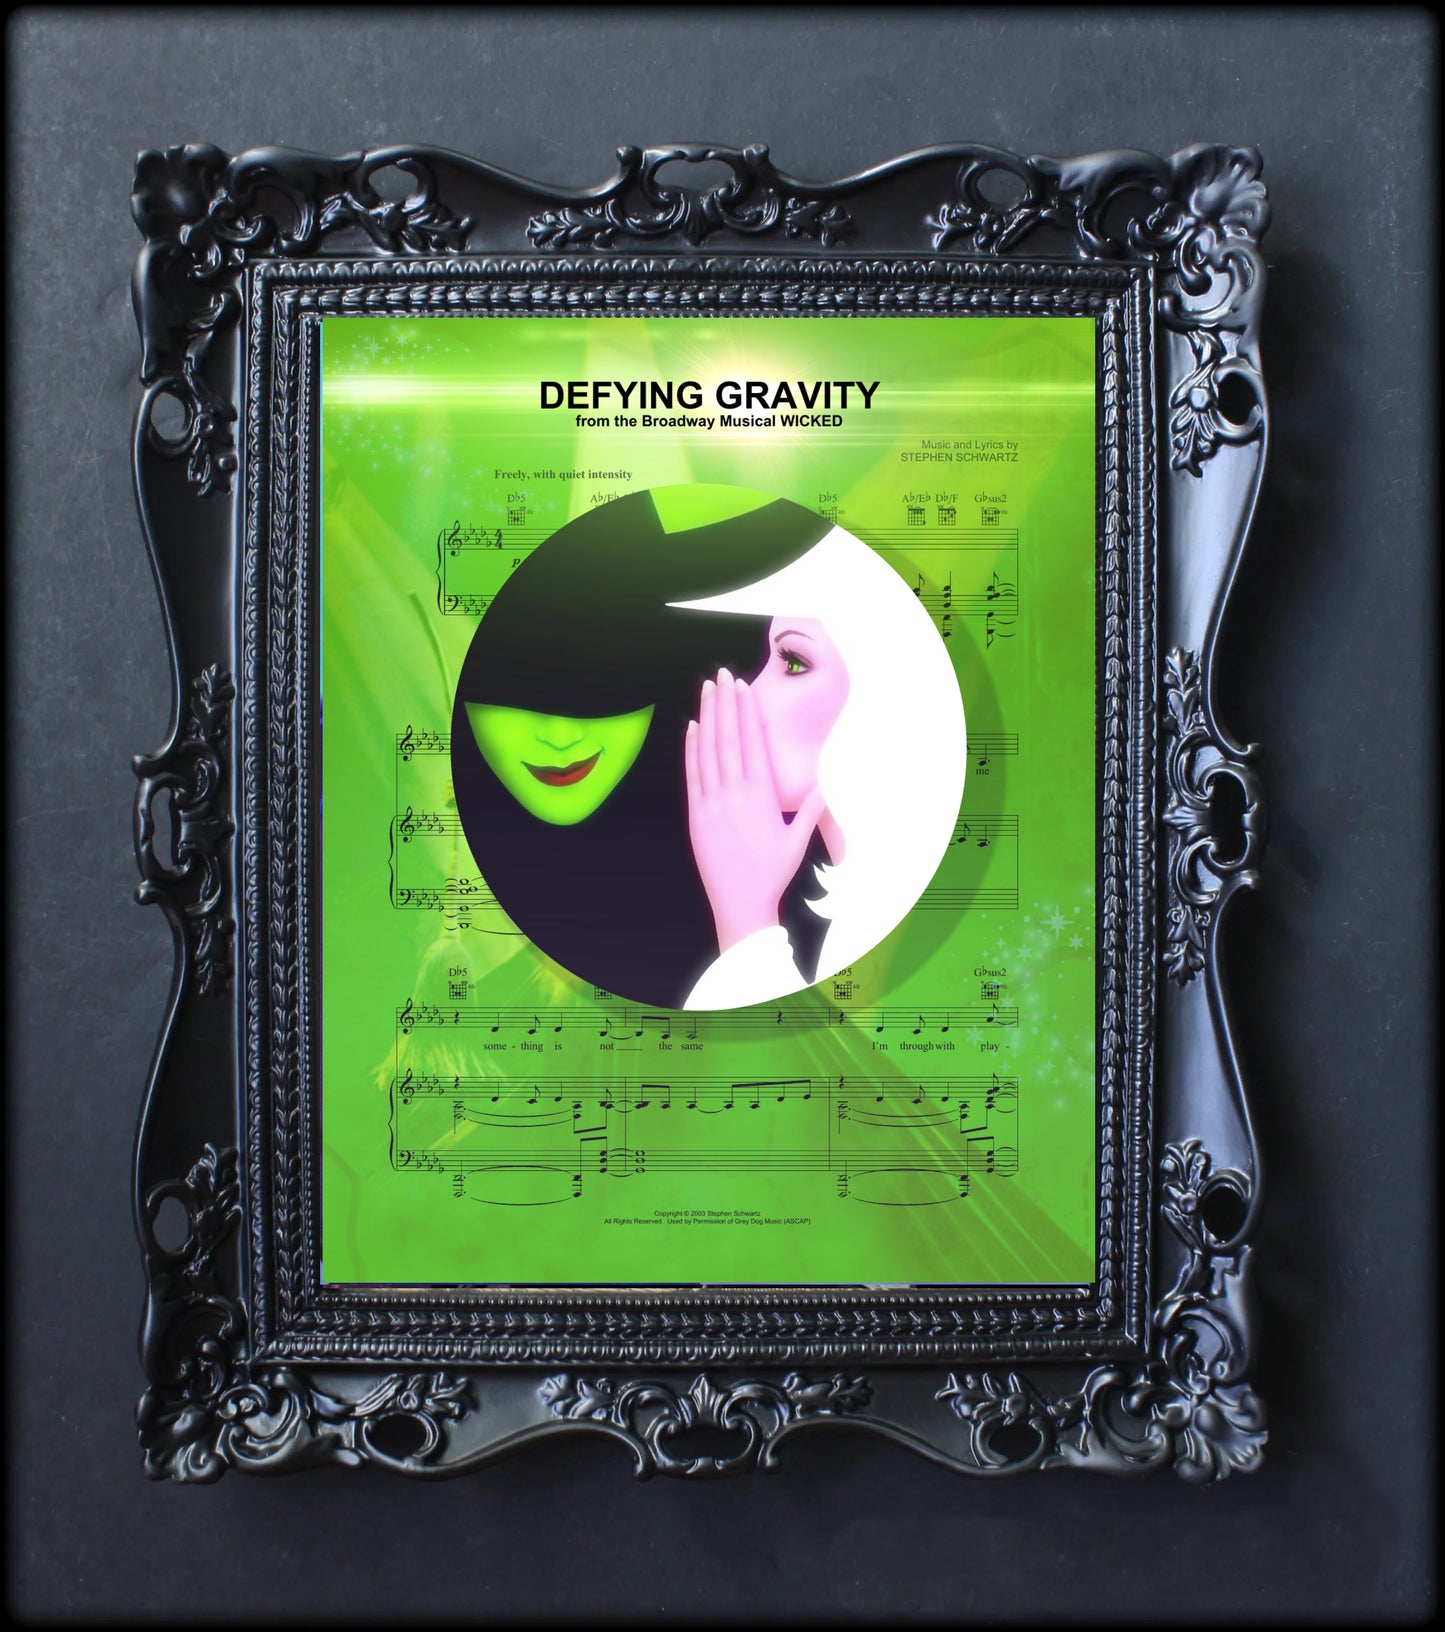 Wicked Defying Gravity song art